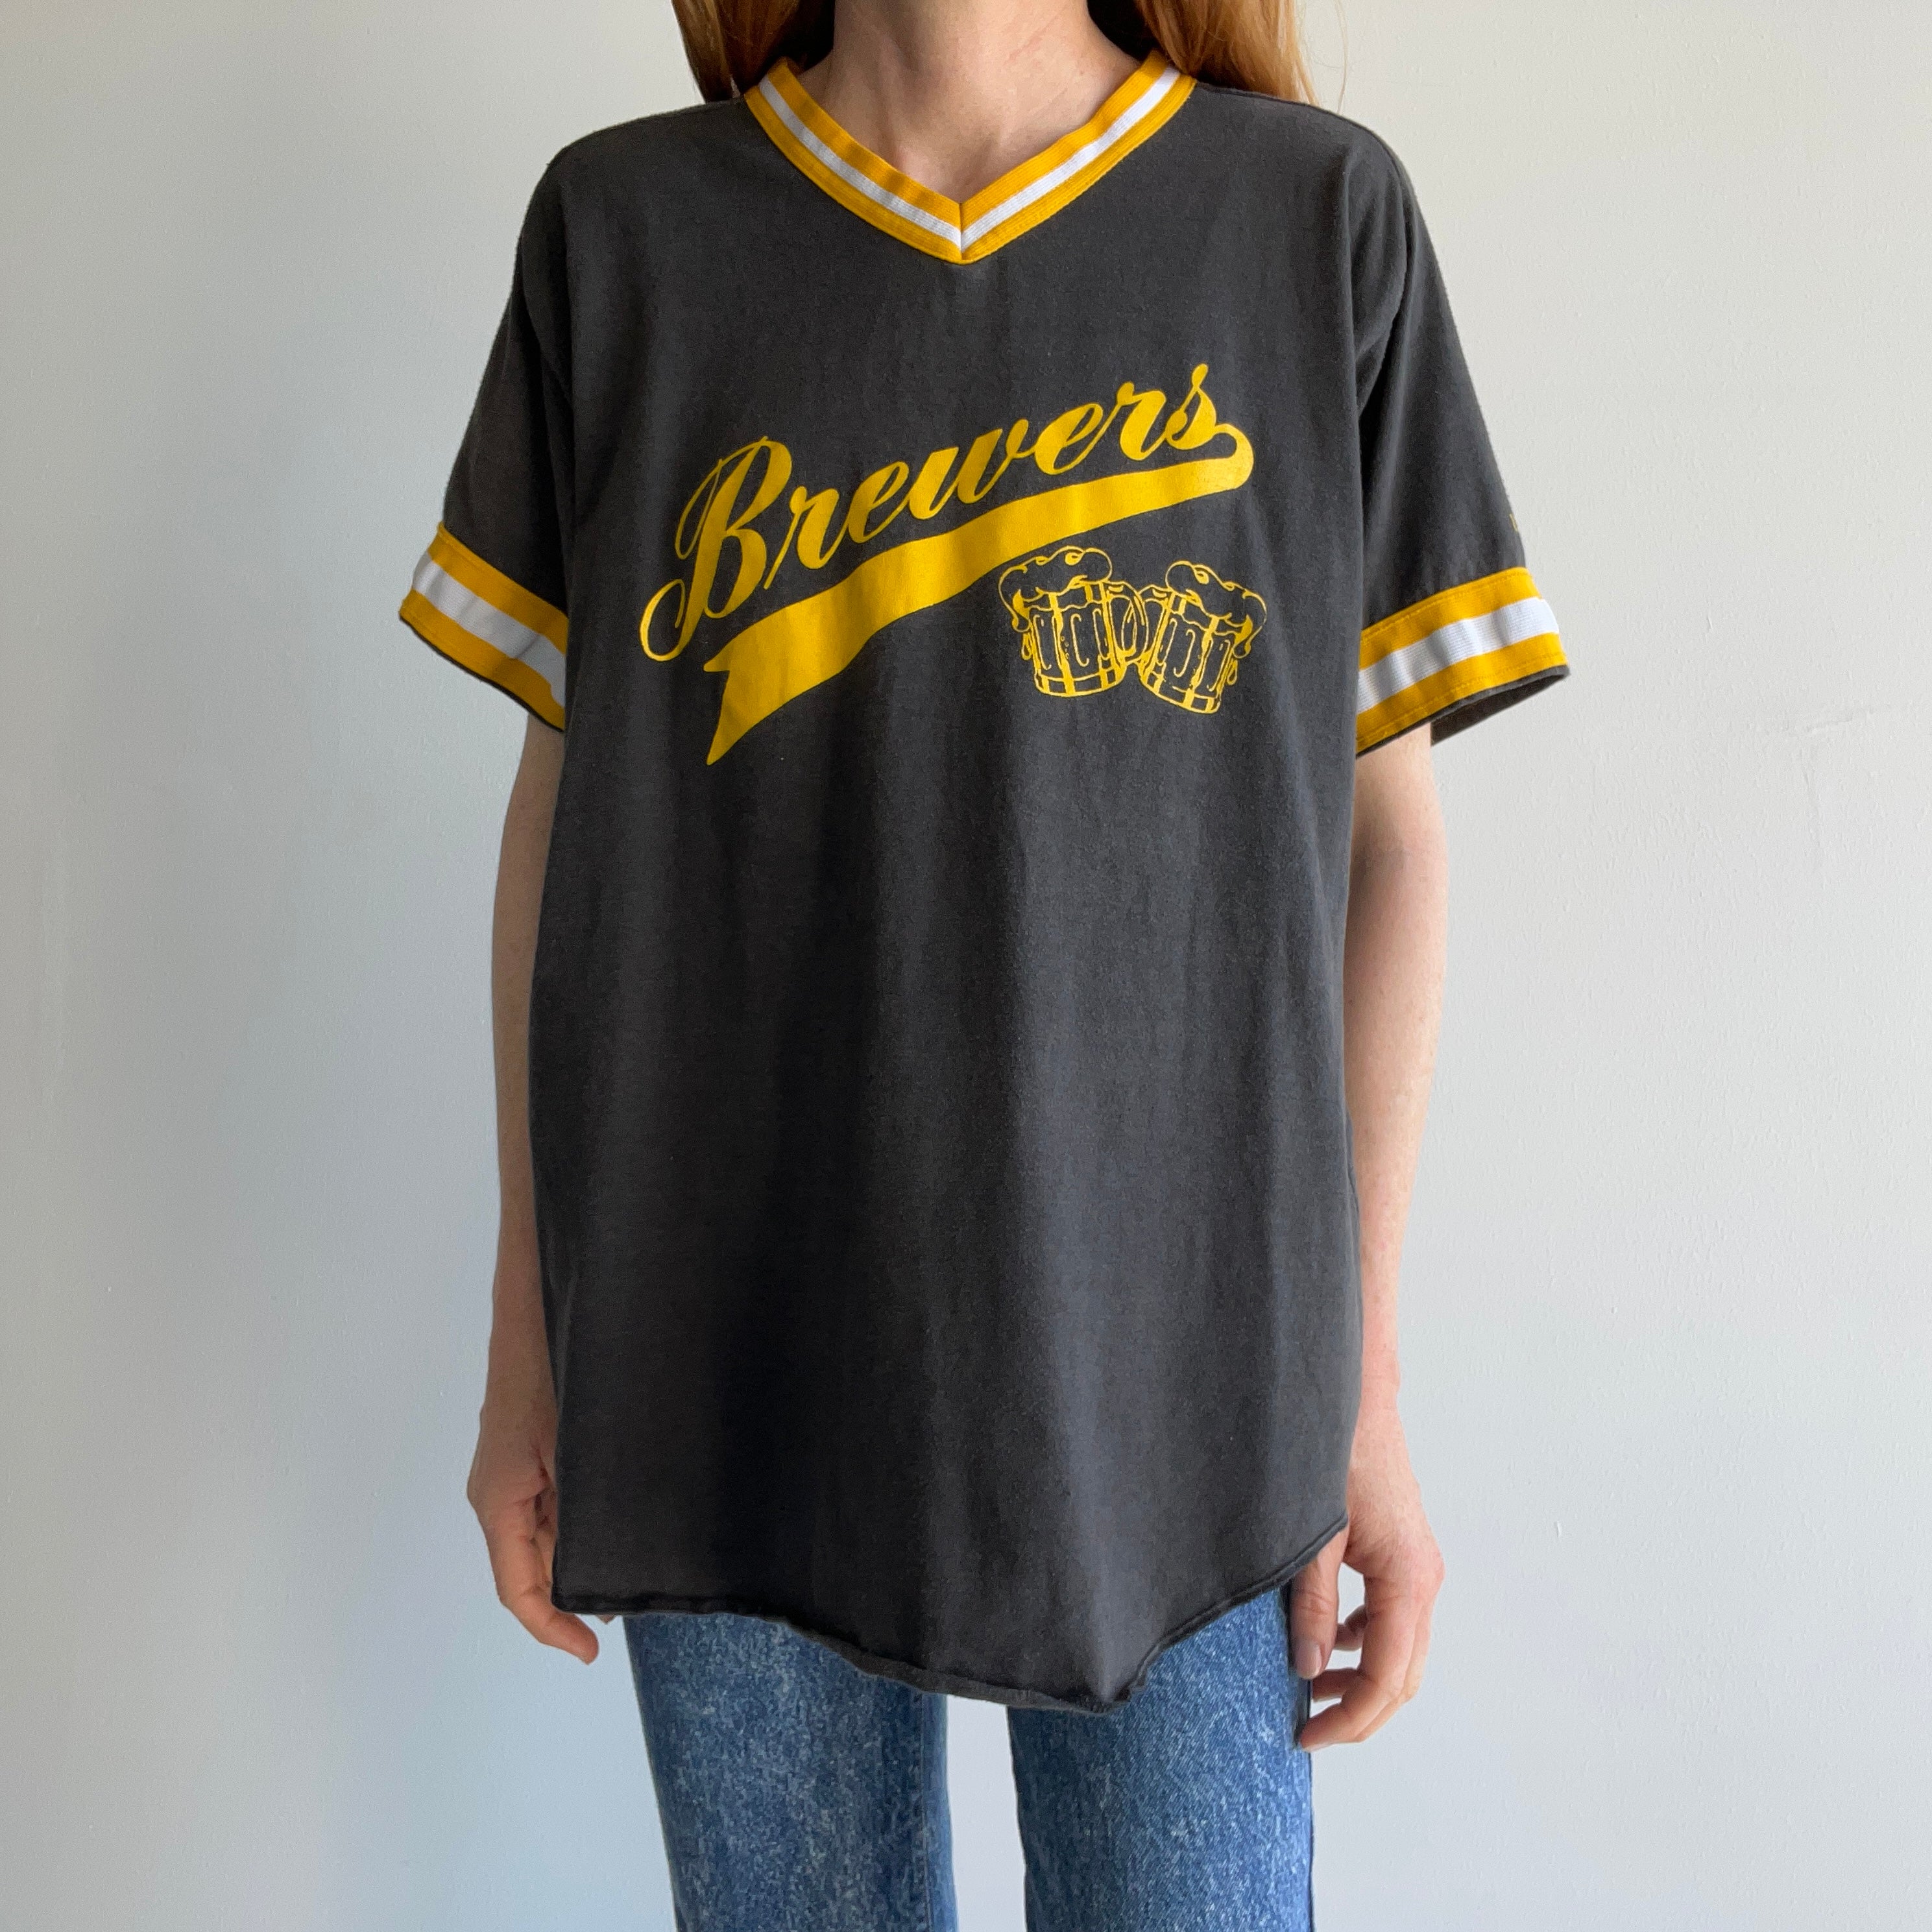 1980s Brewer's No. 13 by Wilson Cotton Baseball T-Shirt - REALLY SUPER GOOD